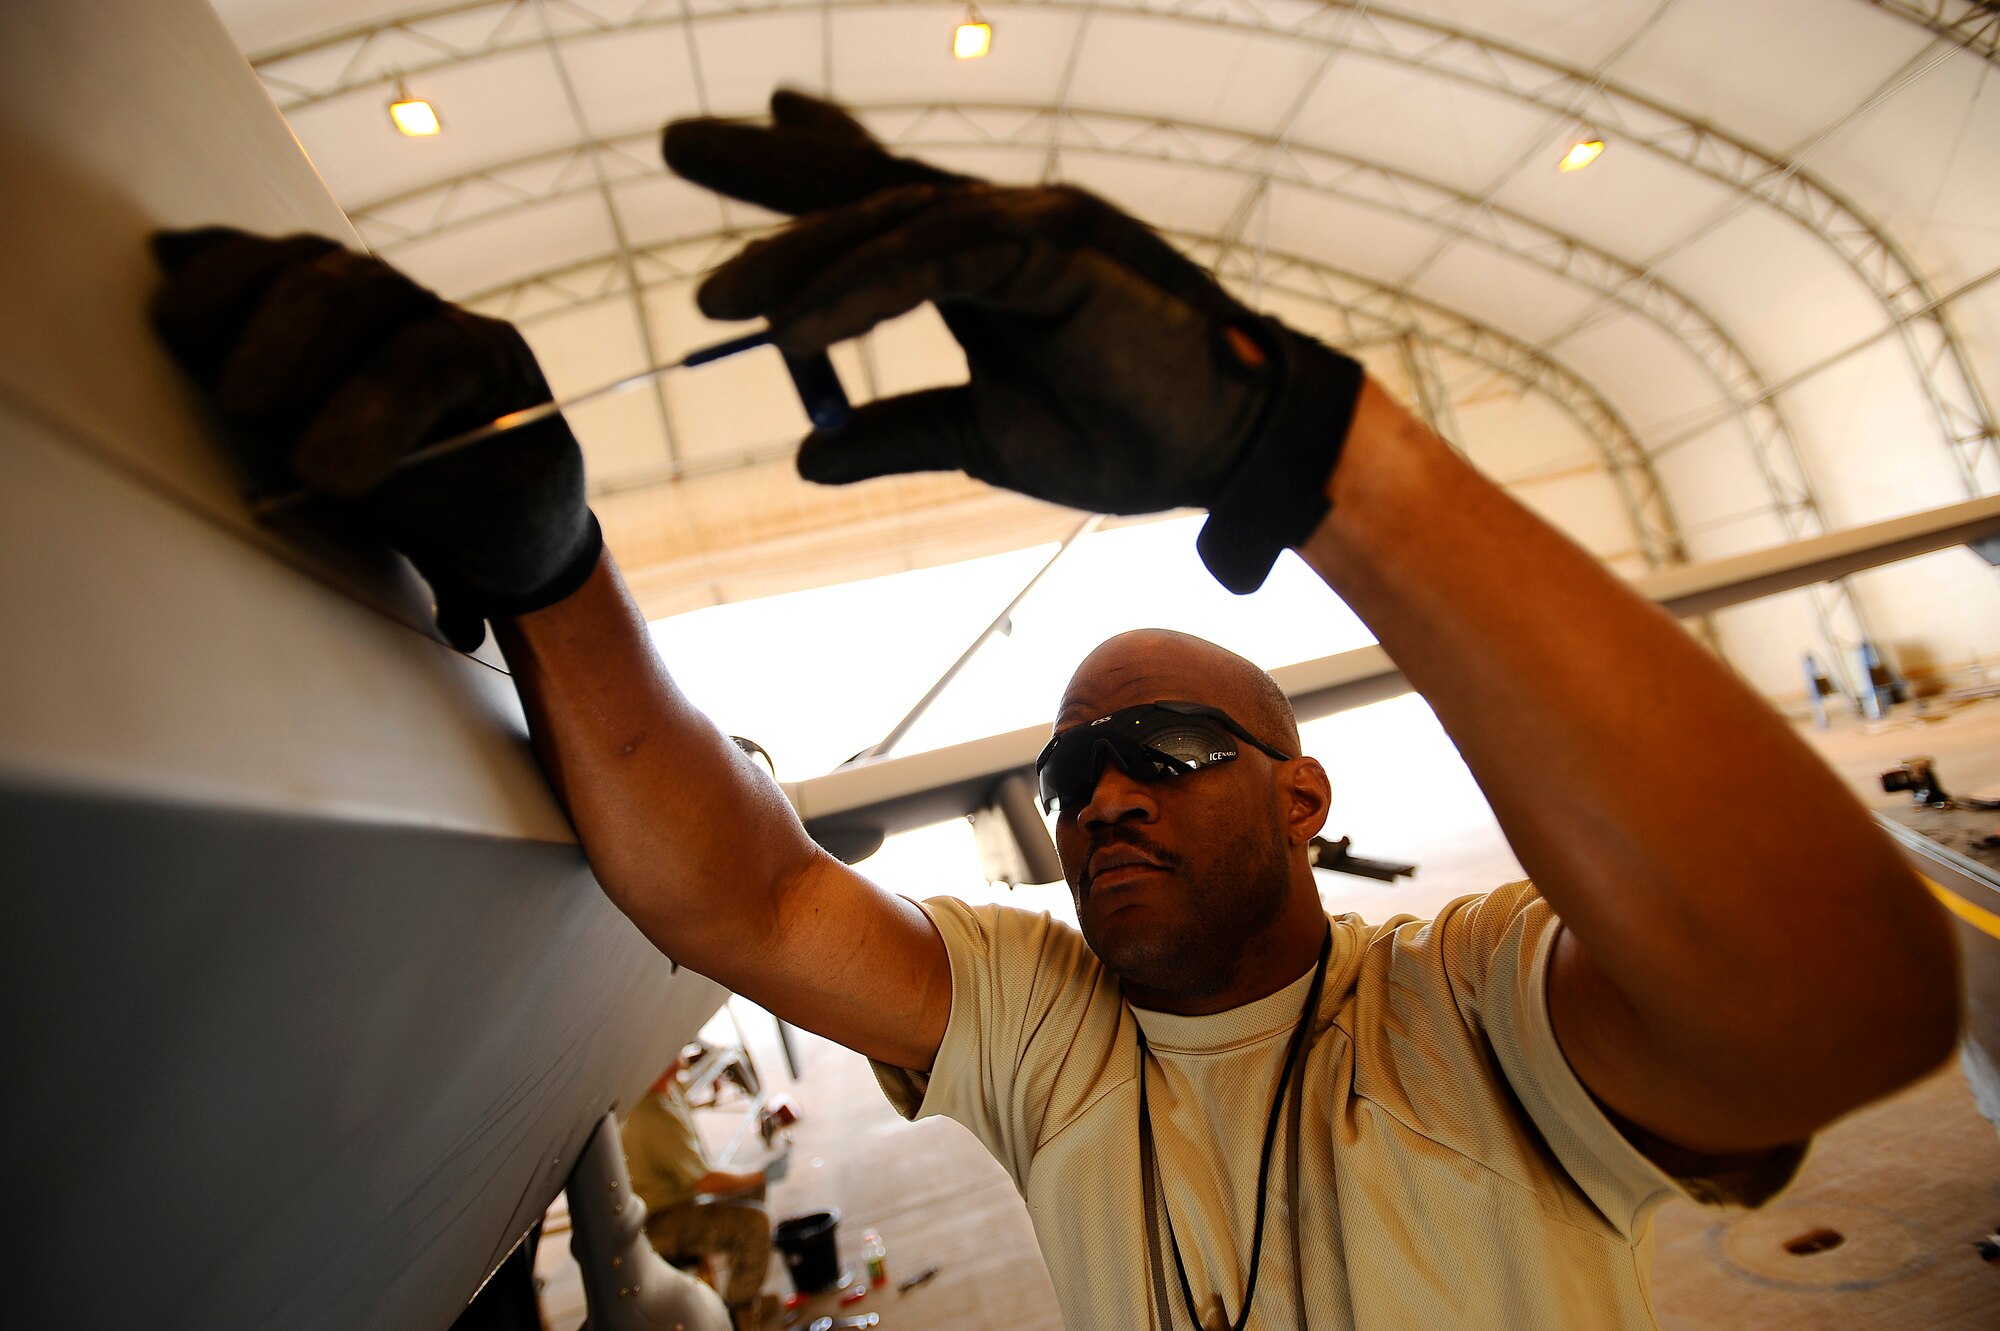 Tech. Sgt. Fred Spears secures the satellite communication radome to an MQ-9 Reaper at Joint Base Balad, Iraq, Nov. 22. A coalition force comprising experts from the U.S. Air Force and Royal Air Force deployed here to man a new Reaper aircraft maintenance unit, attached to the 46th Expeditionary Reconnaissance and Attack Squadron, and assume maintenance from General Atomics, which produces the Reaper for these services. Spears, a Reaper avionics specialist assigned to the 332nd Expeditionary Aircraft Maintenance Squadron, is deployed from Creech Air Force Base, Nev. His hometown is Longview, Texas. (U.S. Air Force photo/Airman 1st Class Jason Epley)(Released)